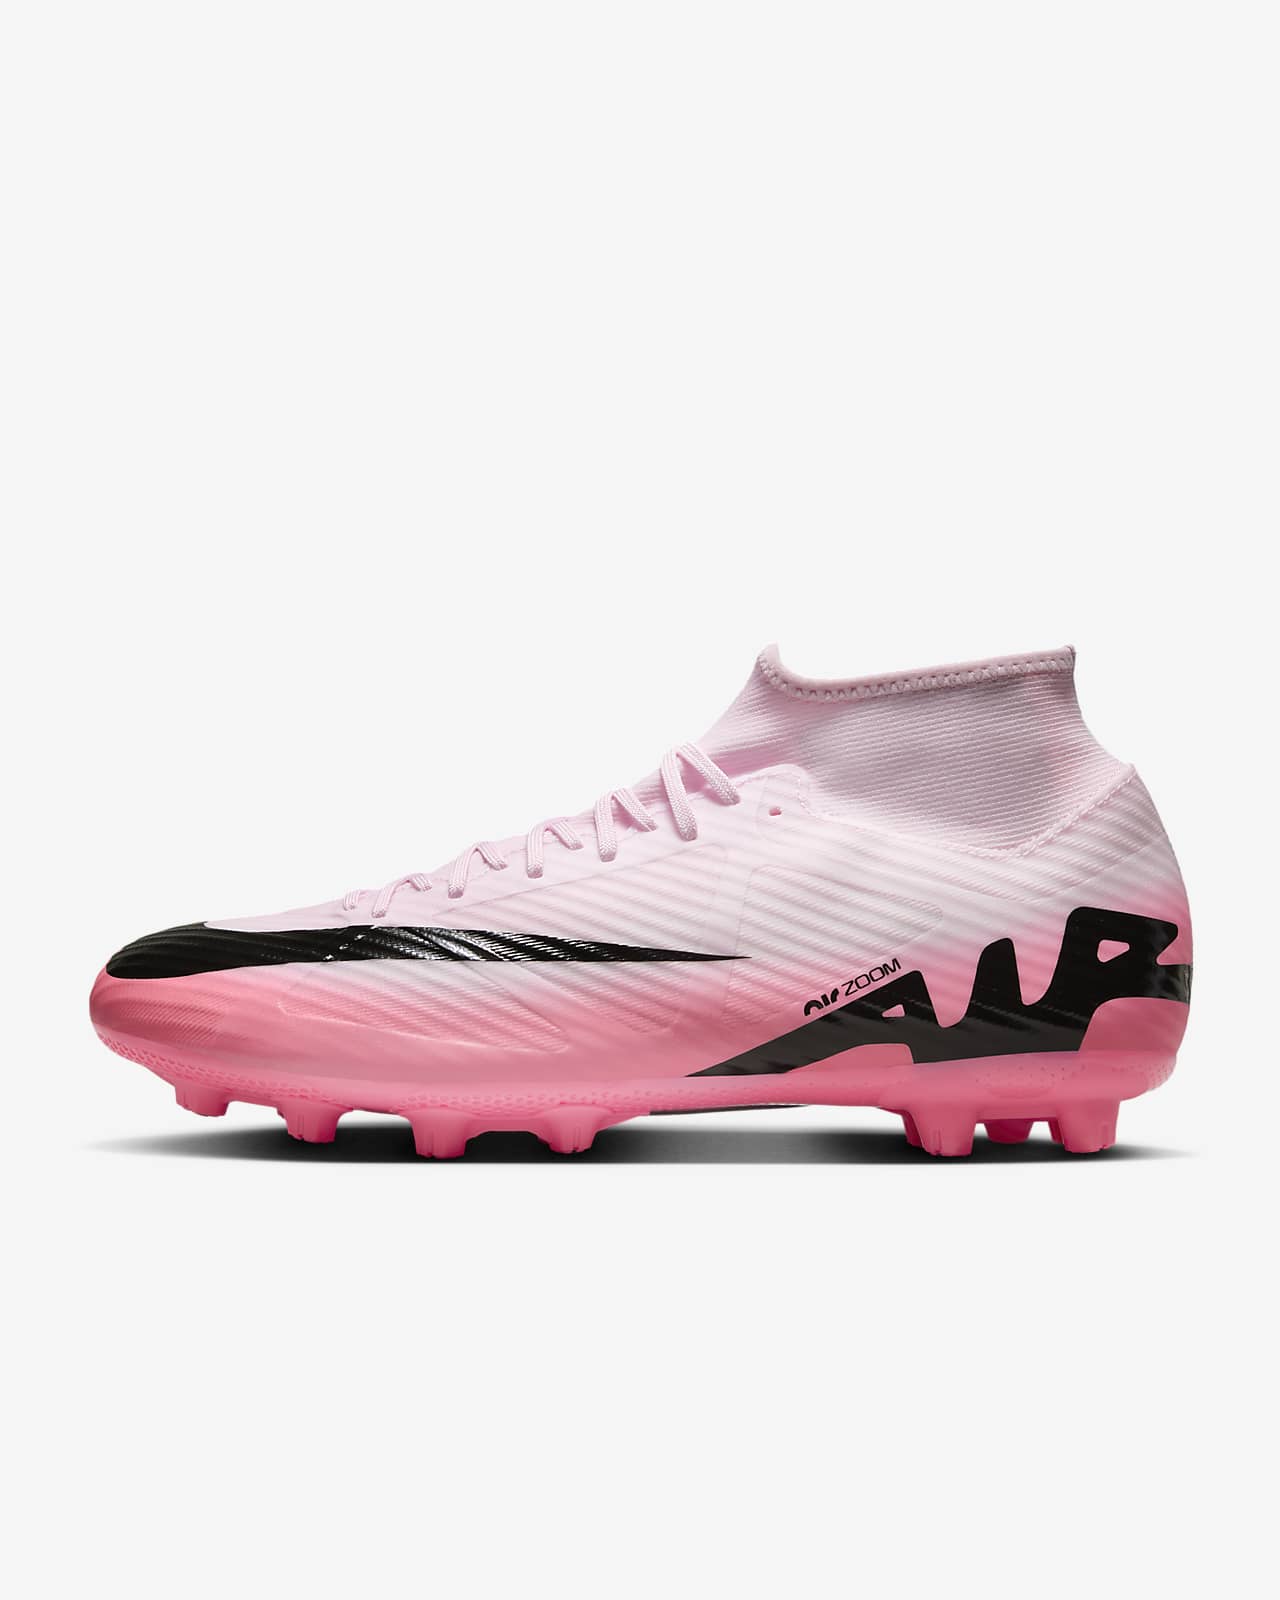 Nike Mercurial Superfly 9 Academy HG High-Top Soccer Cleats